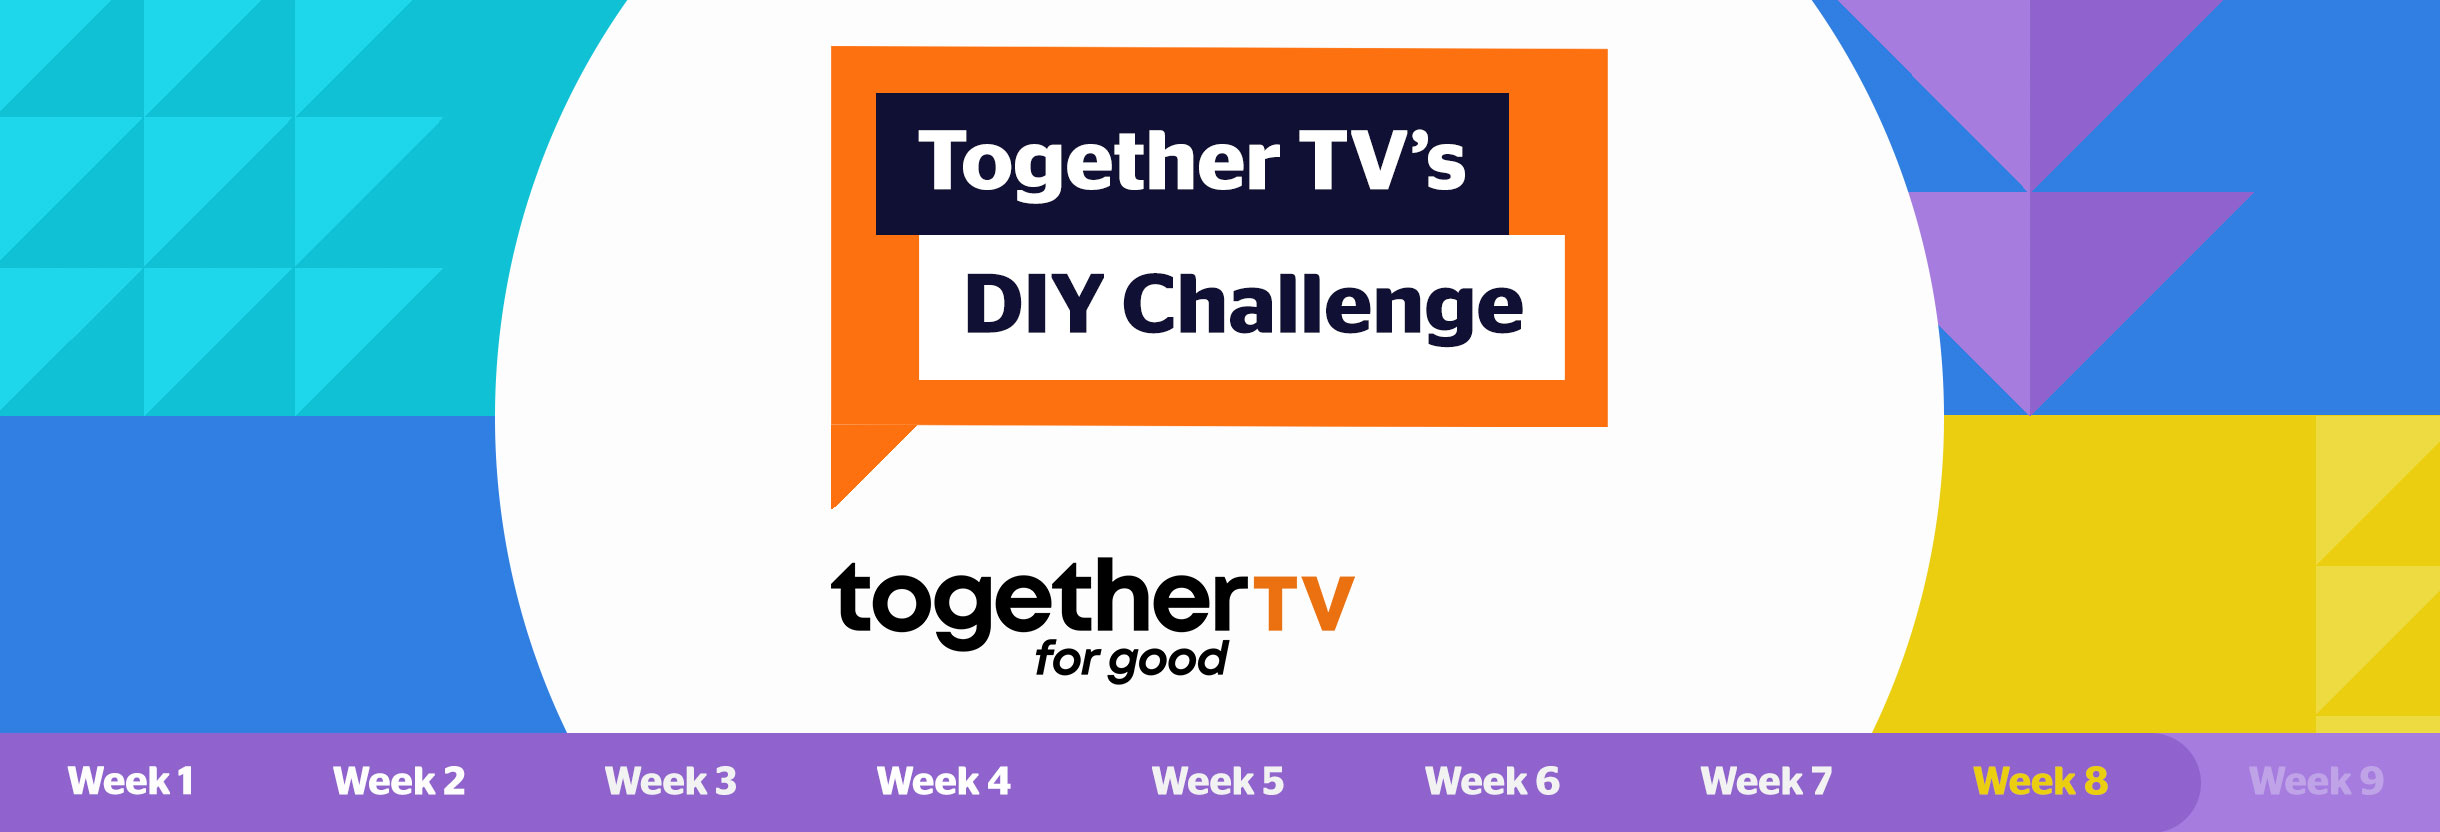 Welcome to Week 8 of the DIY Challenge